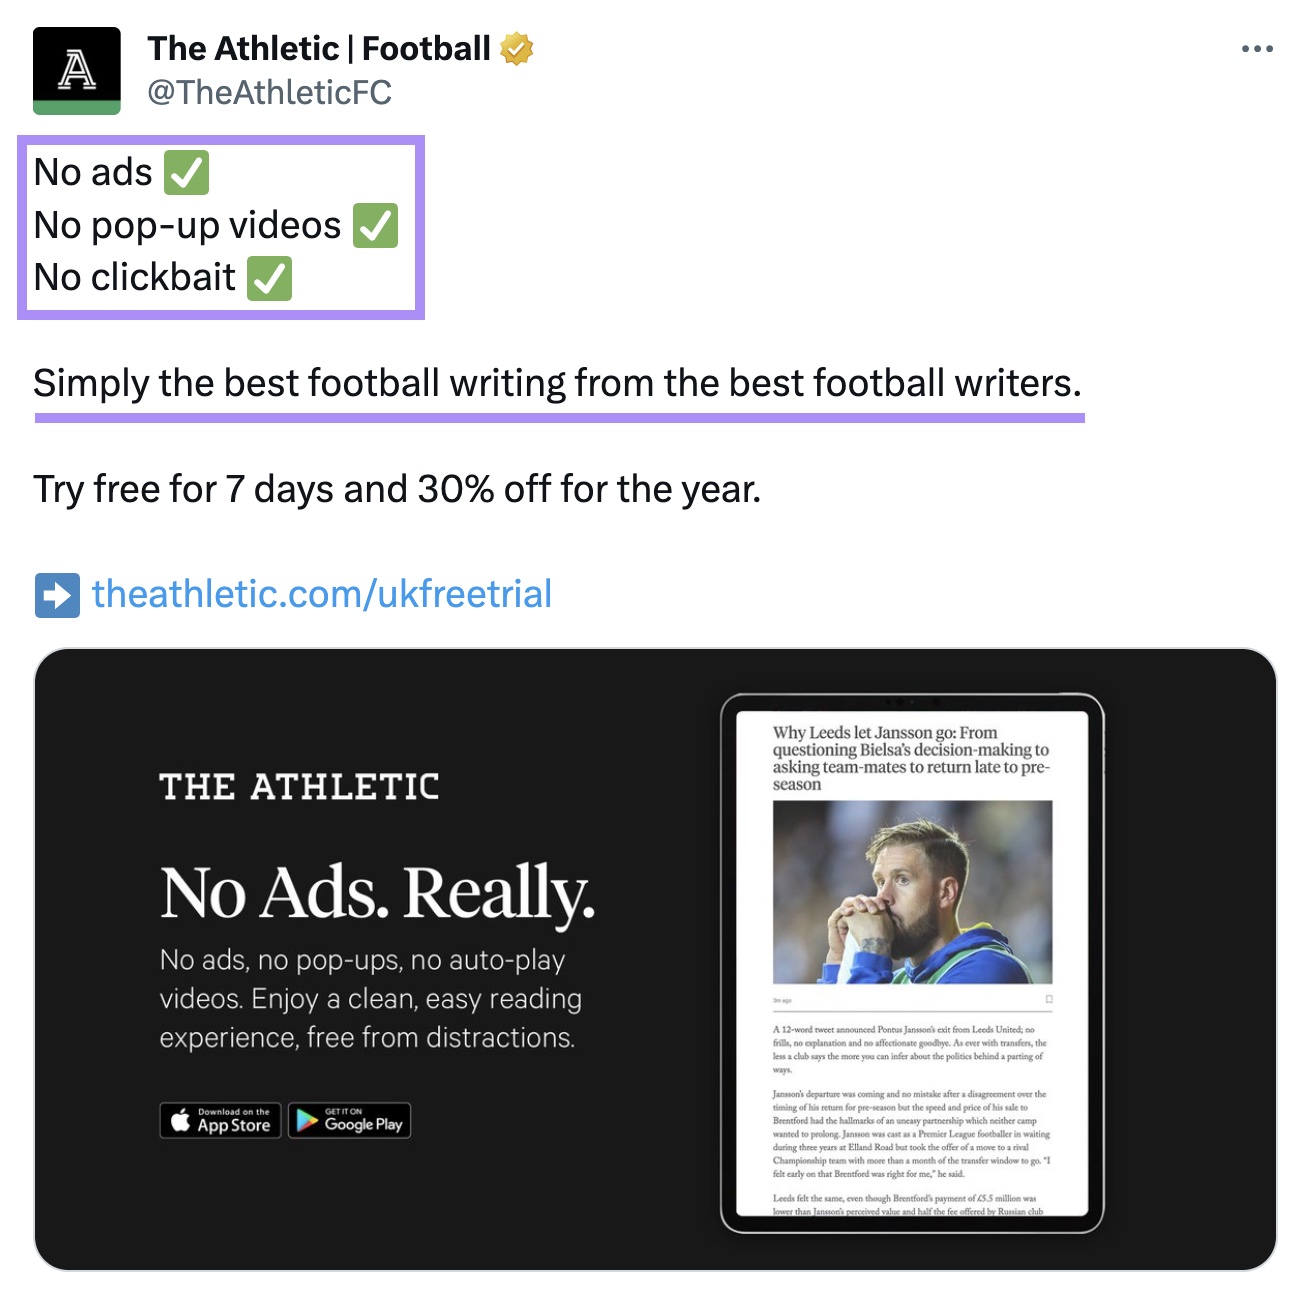 The Athletic's "No ads, no pop-up videos, no clickbait" “Simply the best football writing from the best football writers” copy